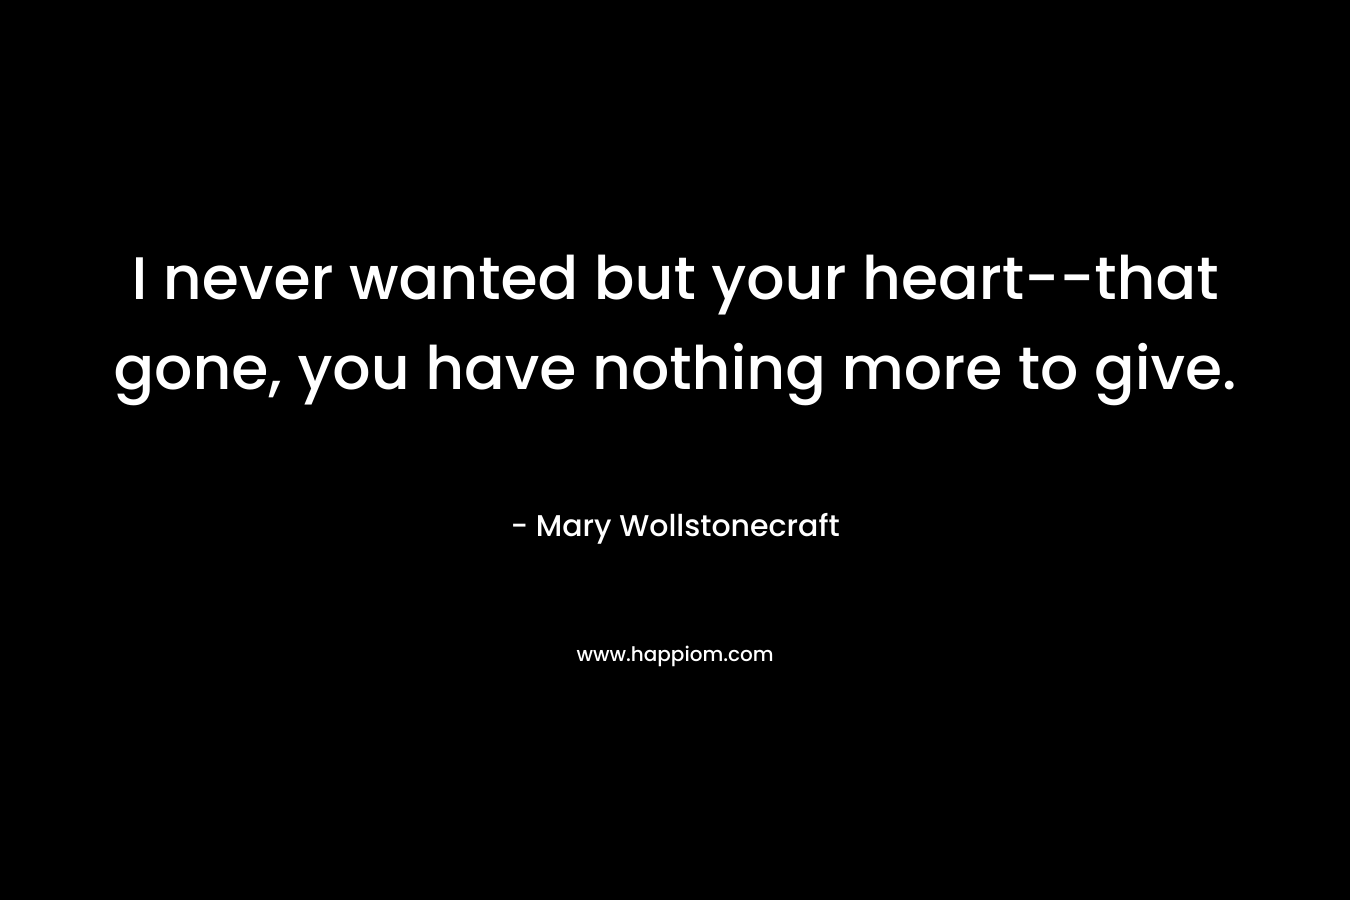 I never wanted but your heart--that gone, you have nothing more to give.